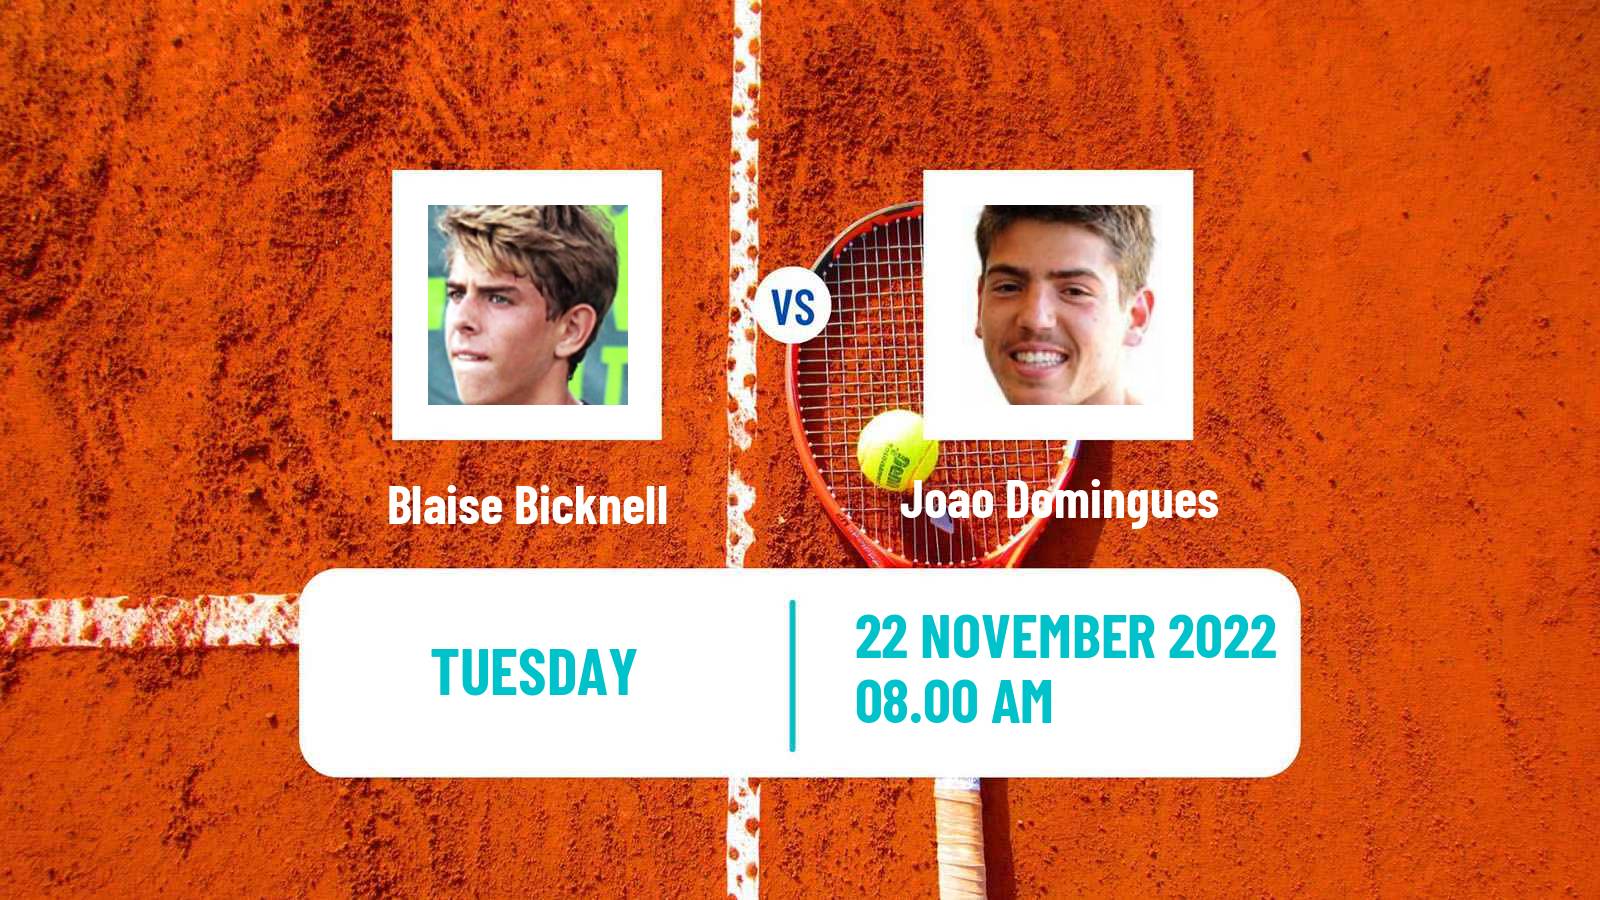 Tennis ATP Challenger Blaise Bicknell - Joao Domingues